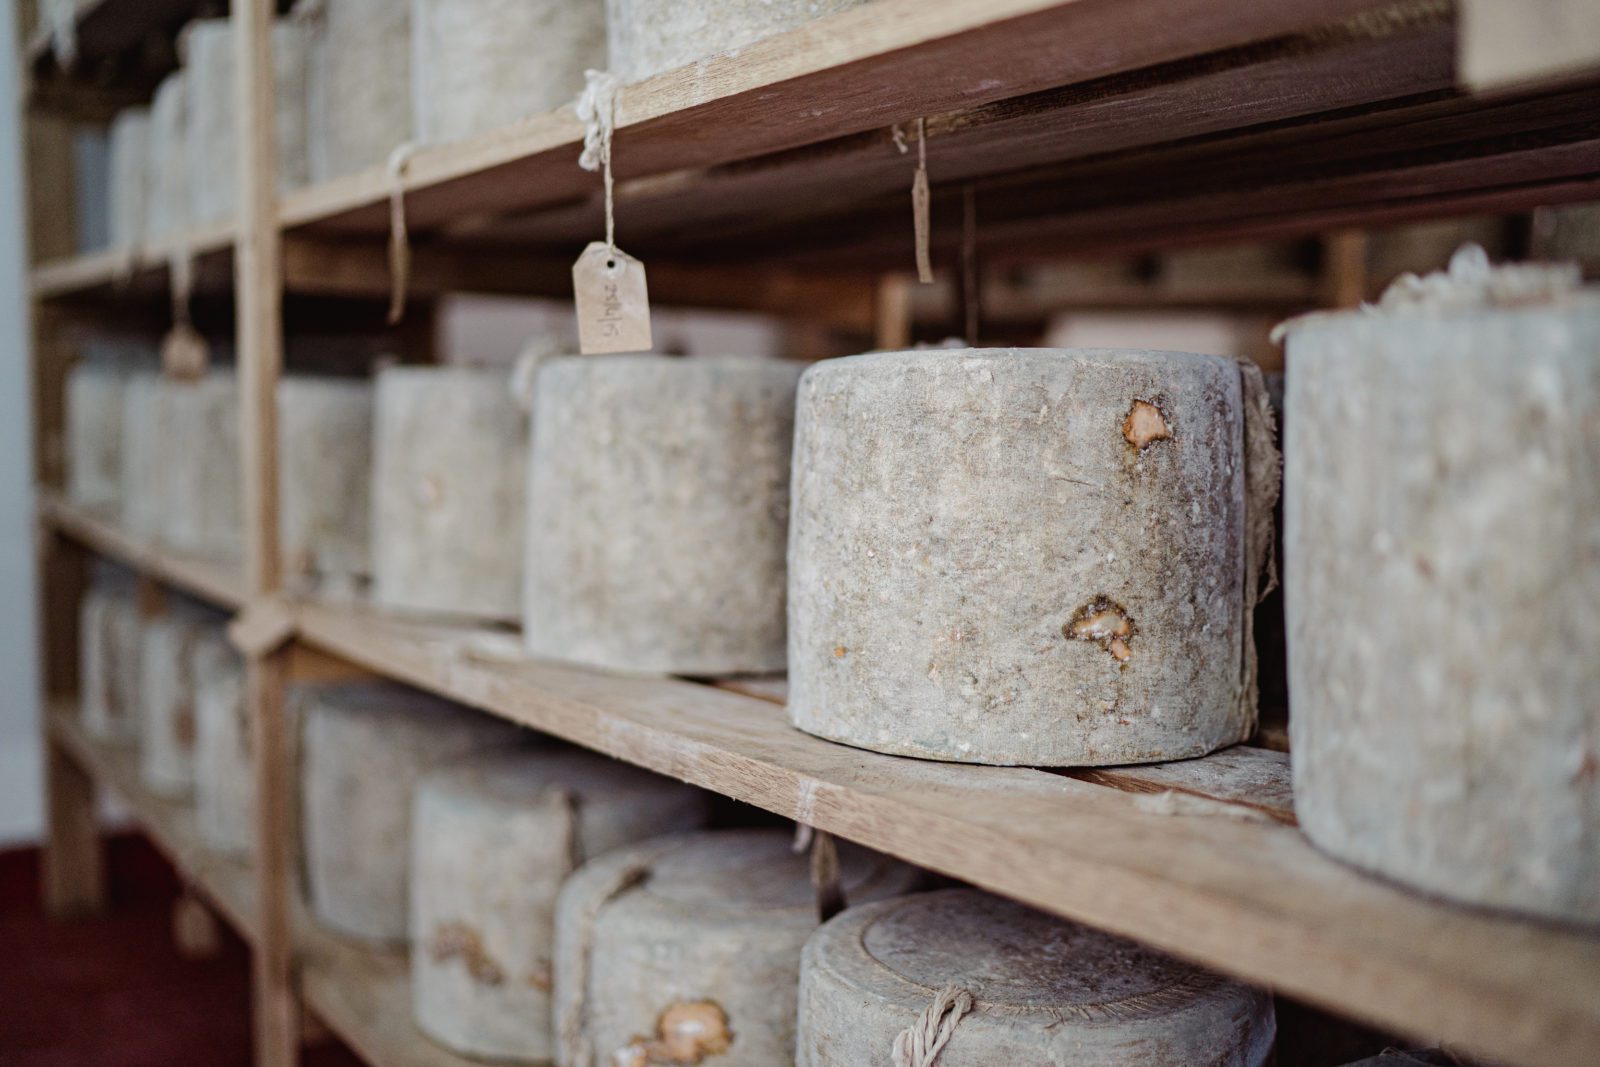 The cheese maturing room. 